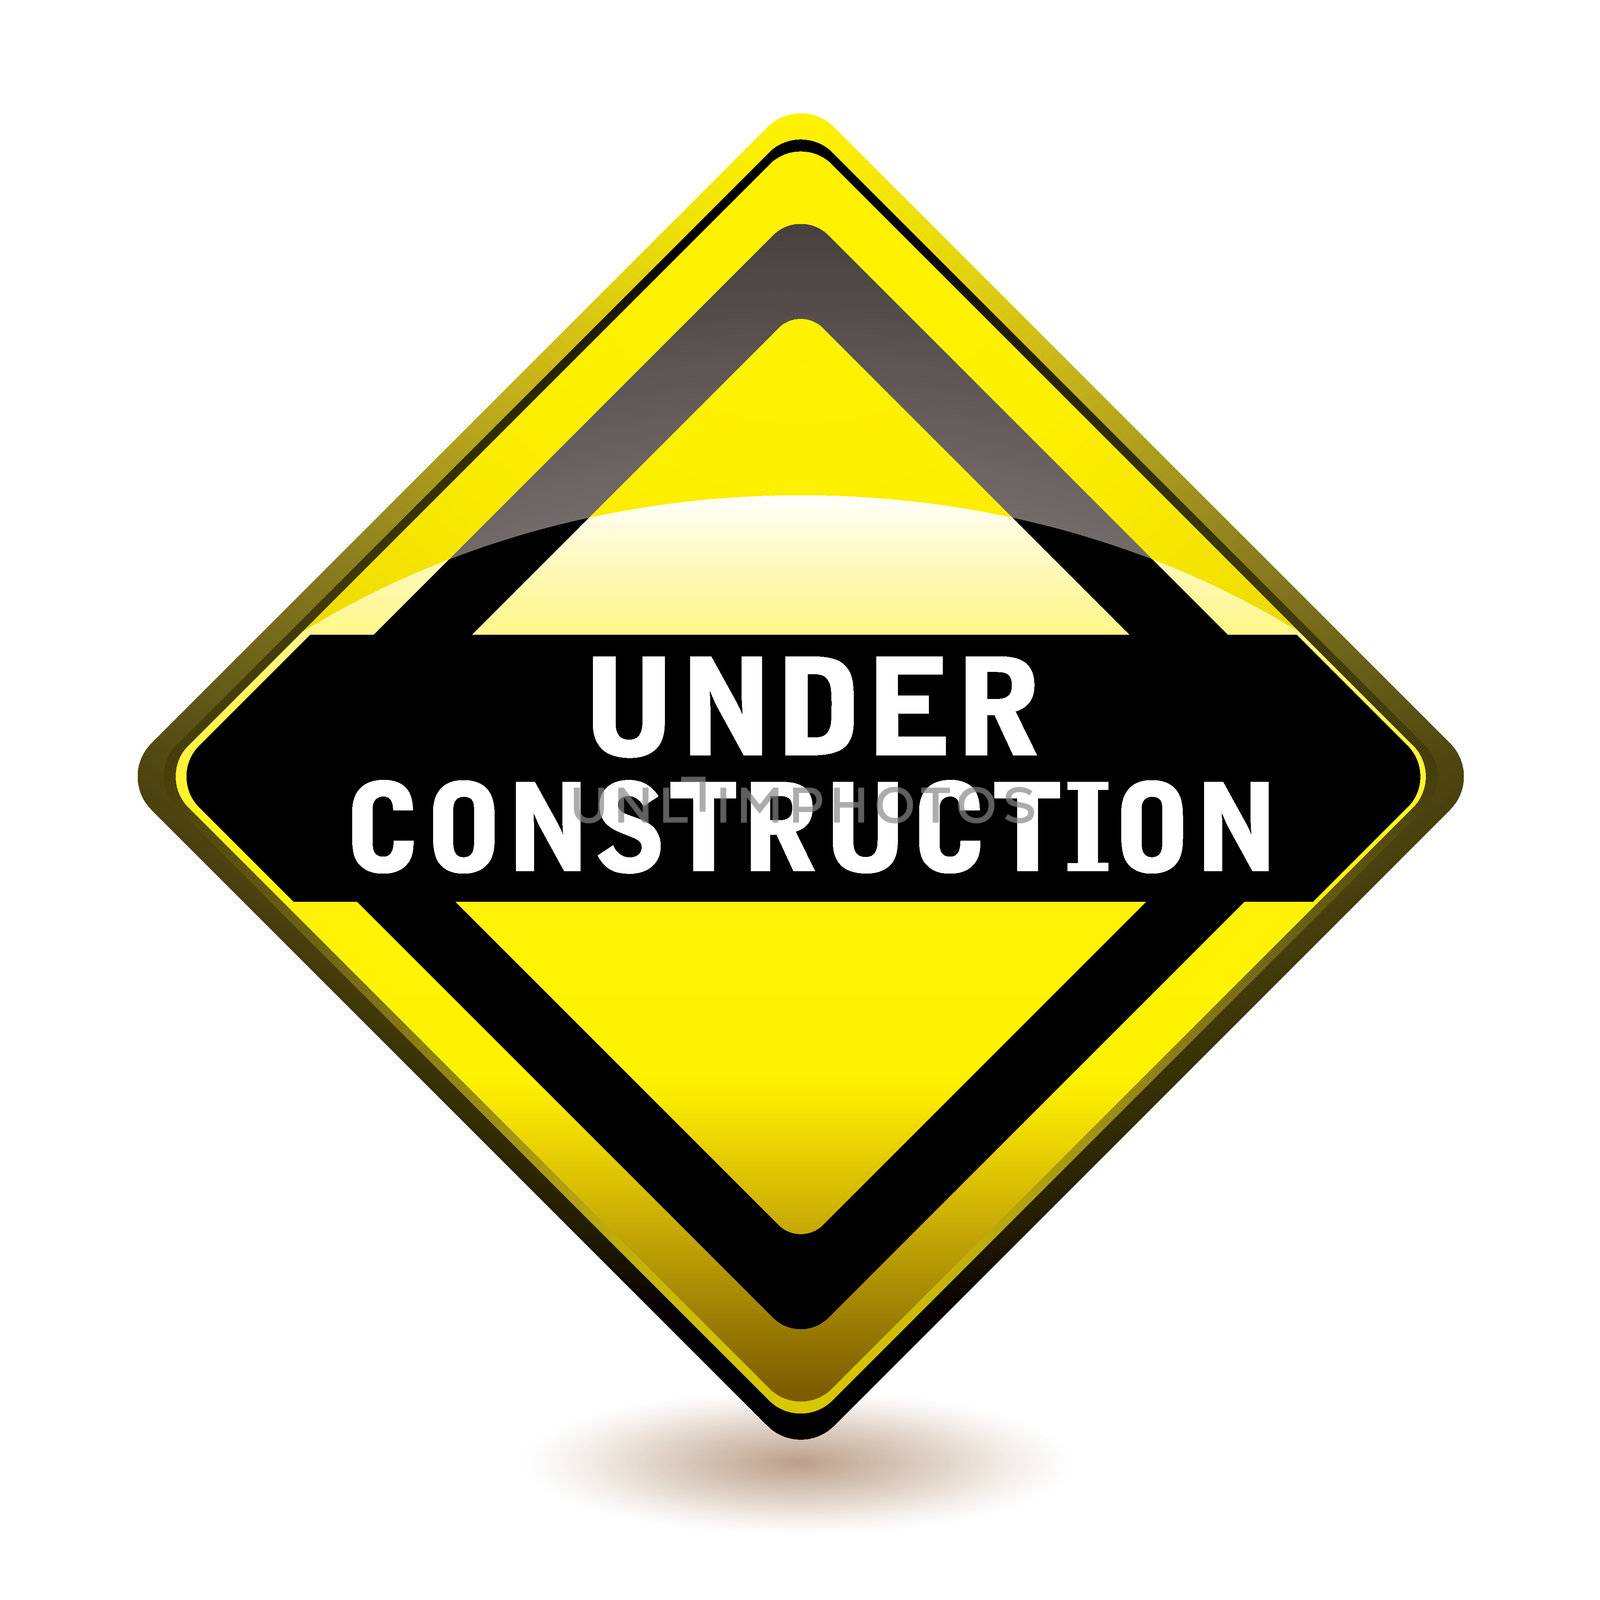 Under construction icon by nicemonkey